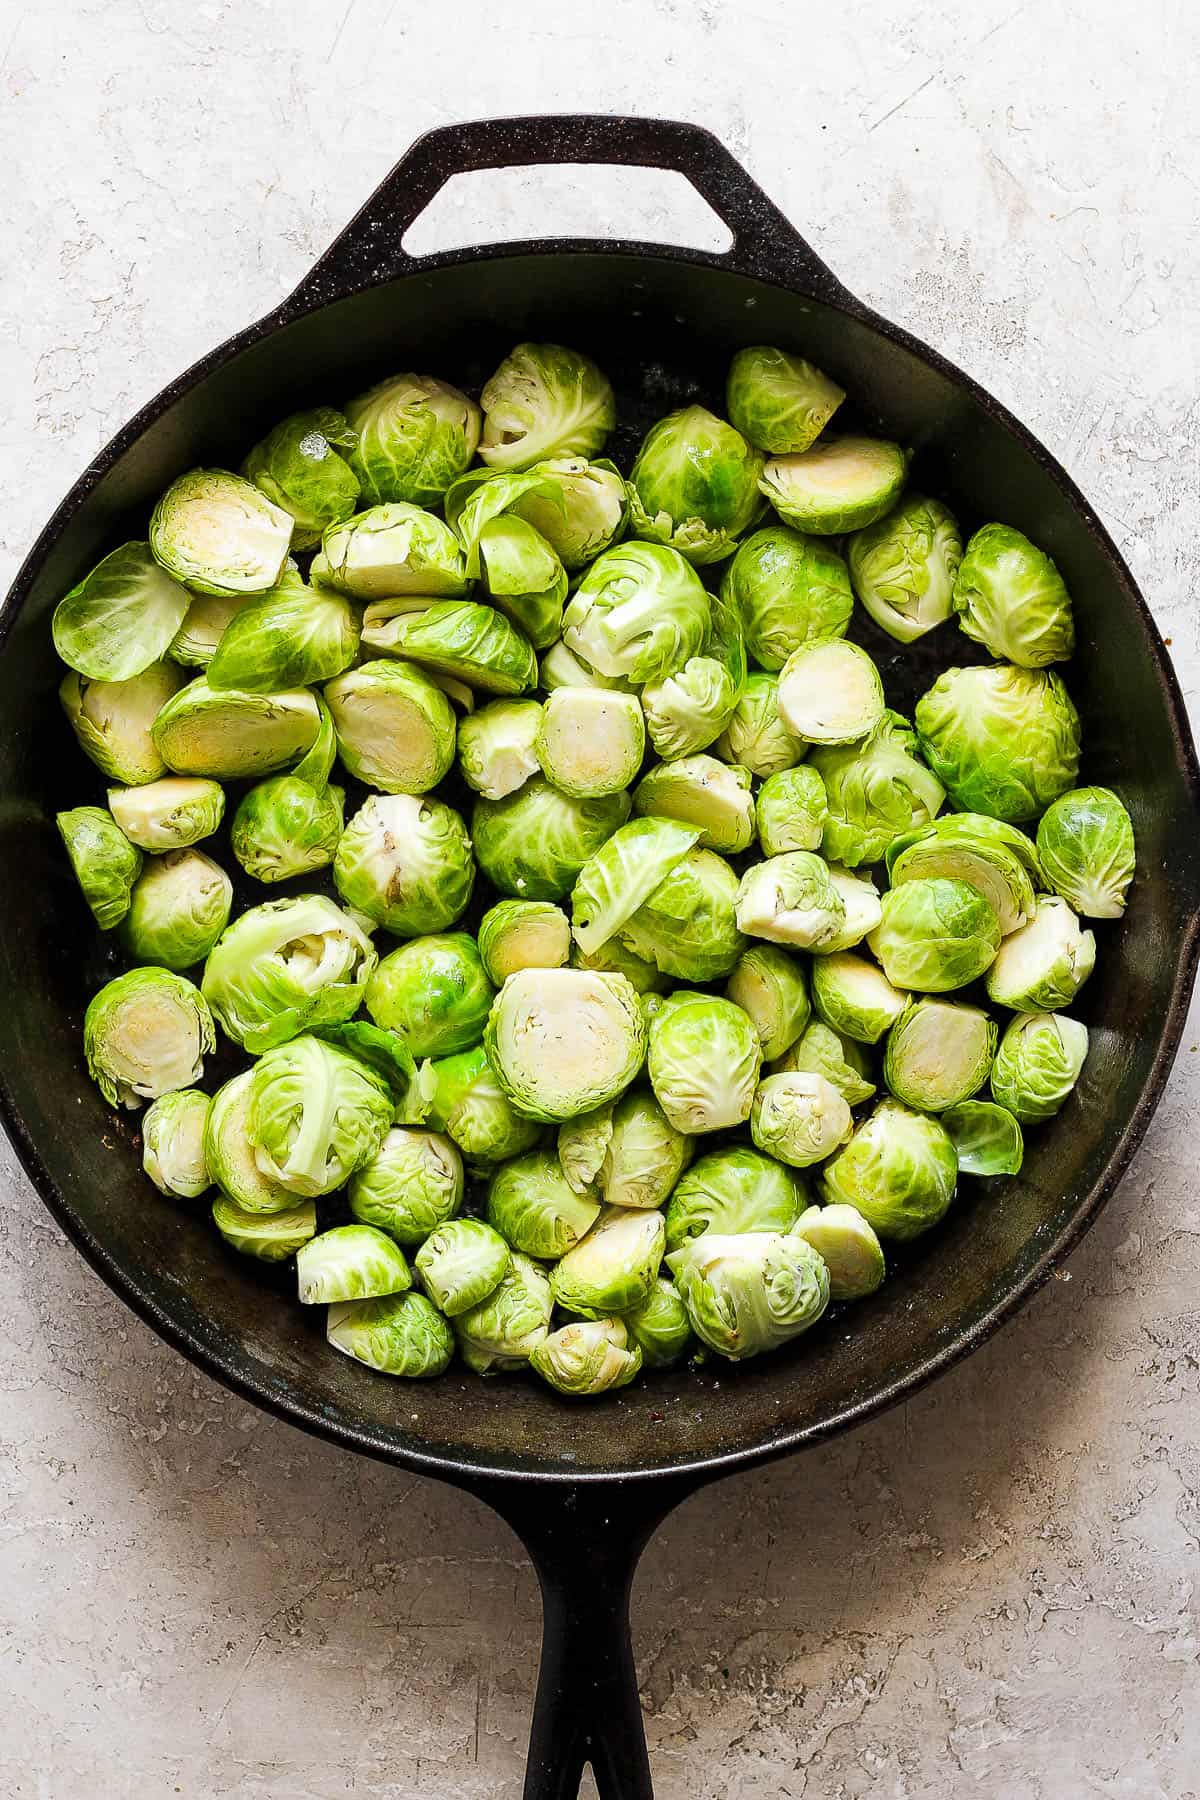 Prepped brussel sprouts in the cast iron skillet.